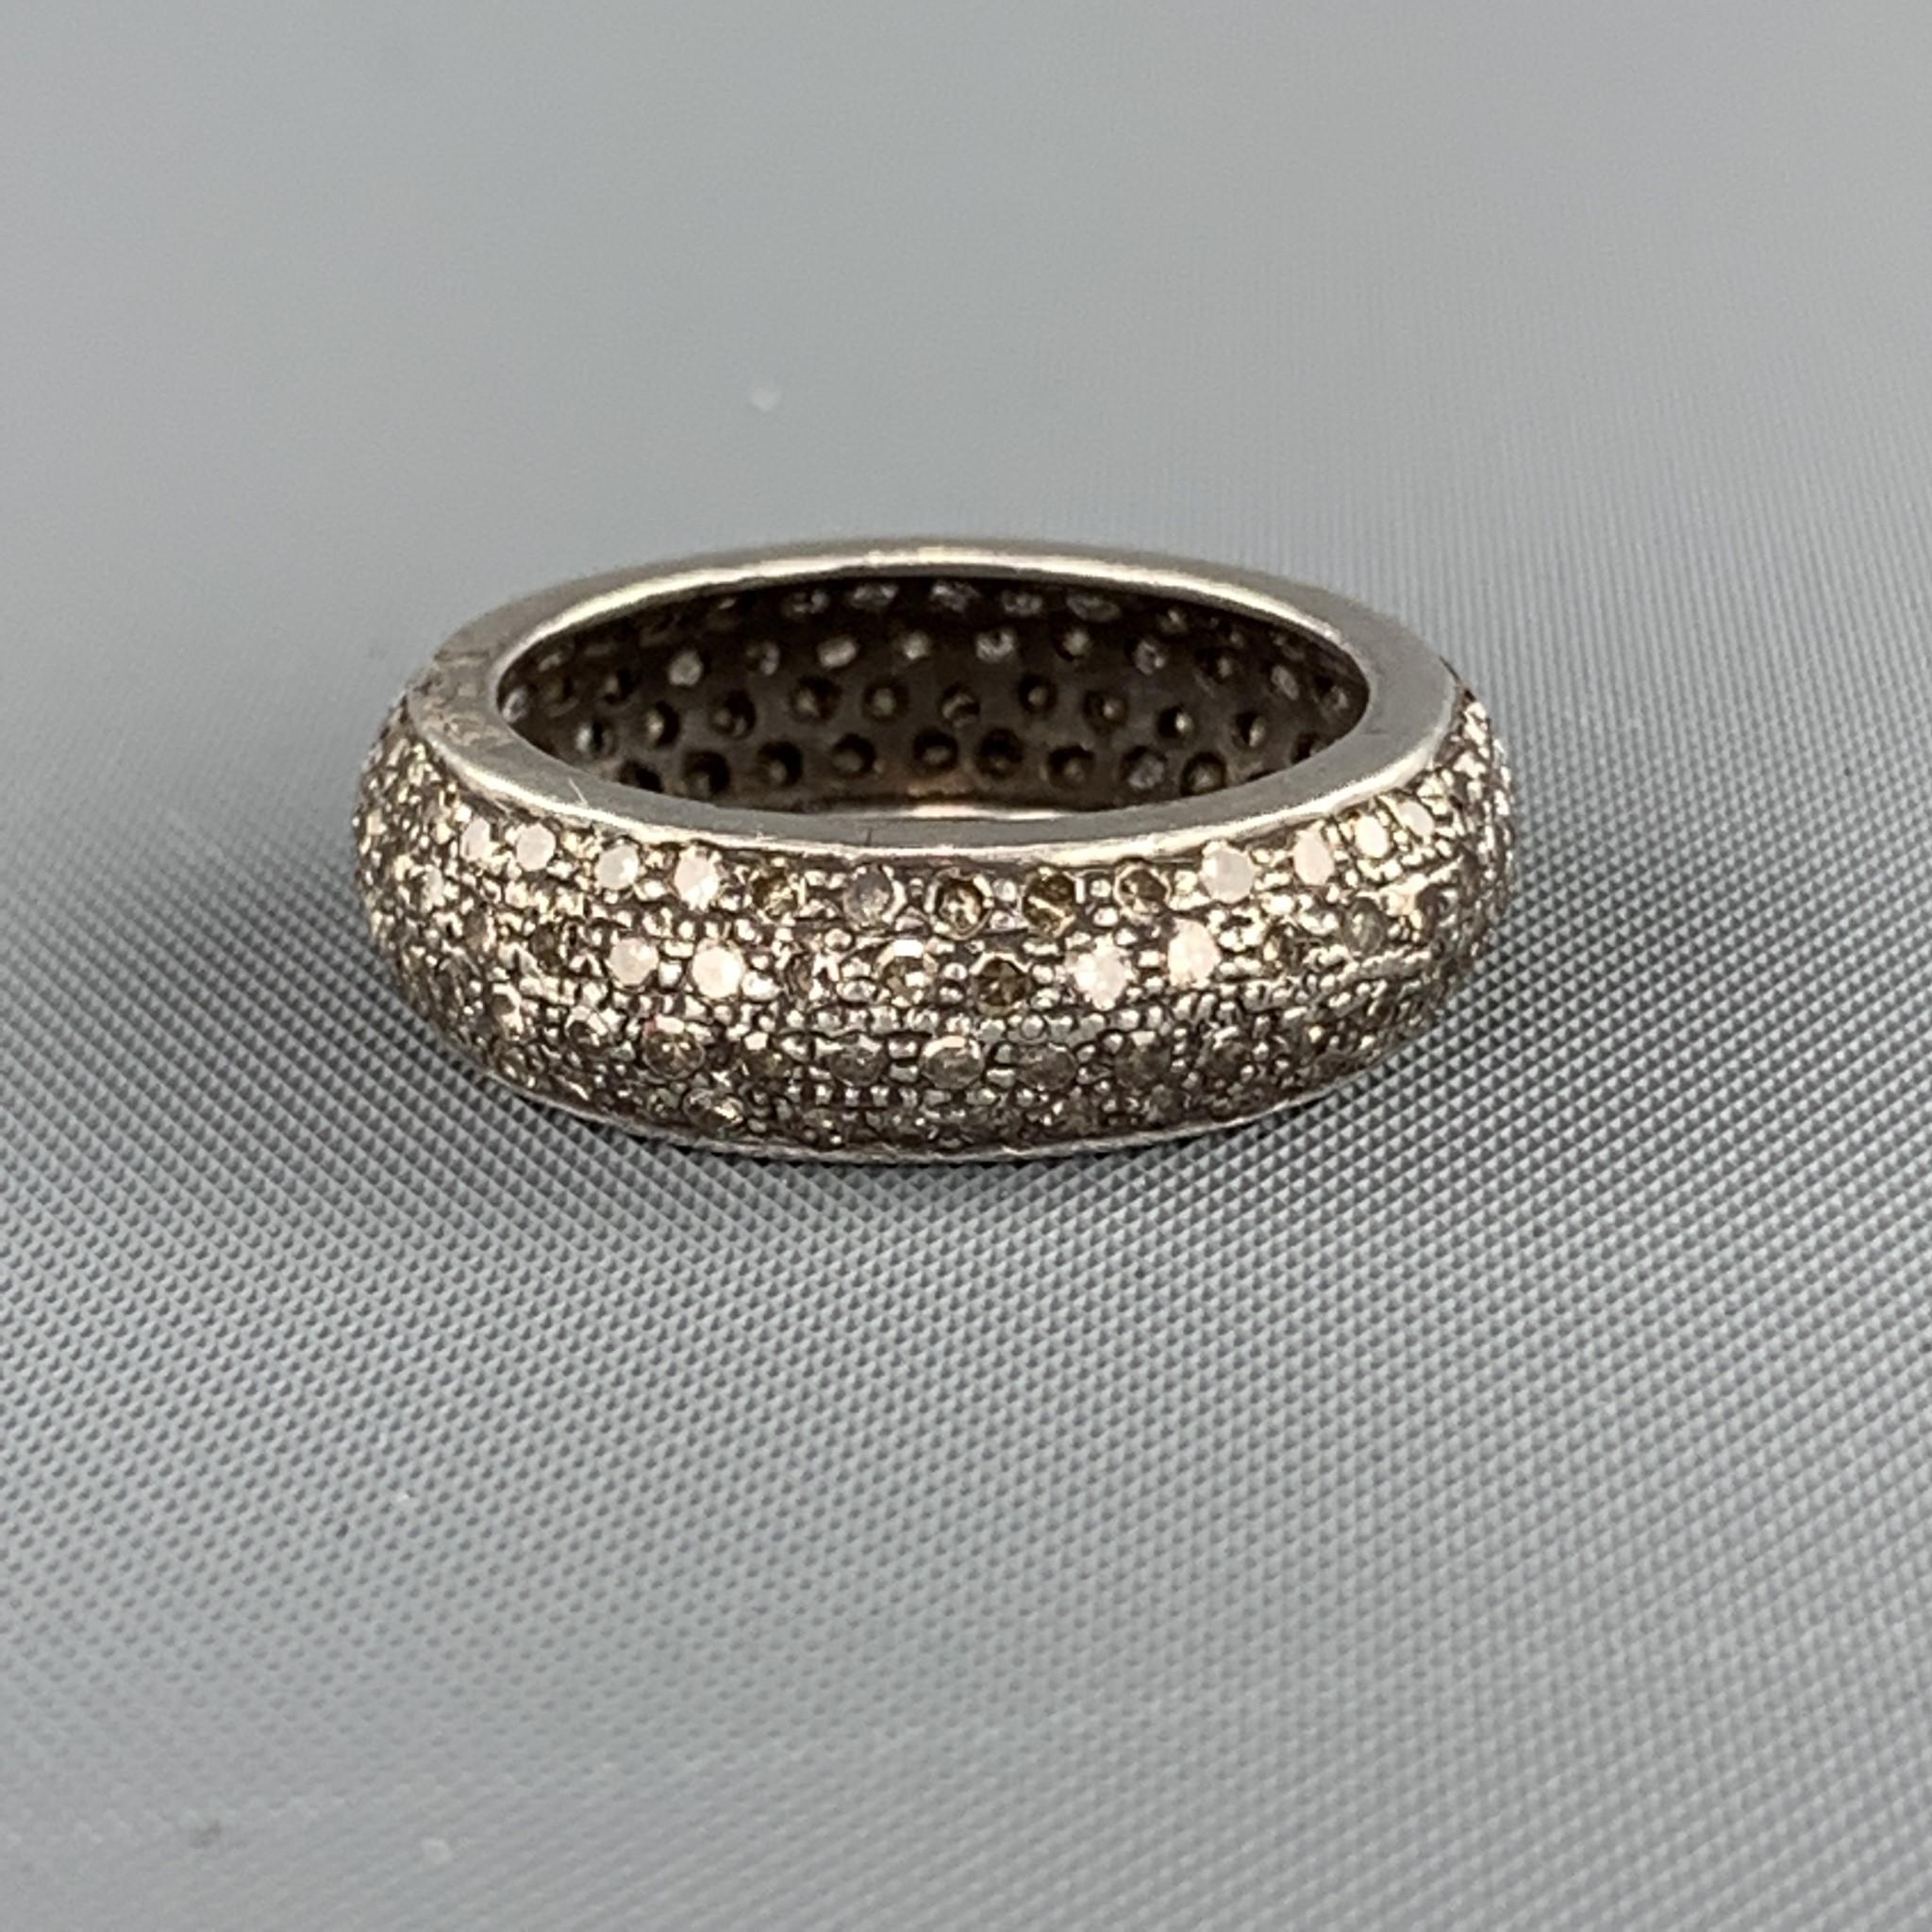 RENEE SHEPPARD band ring comes in a smoke tone Sterling Silver with an engraved texture encrusted with Pave diamonds throughout. 

Very Good Pre-Owned Condition.
Size: 6.5